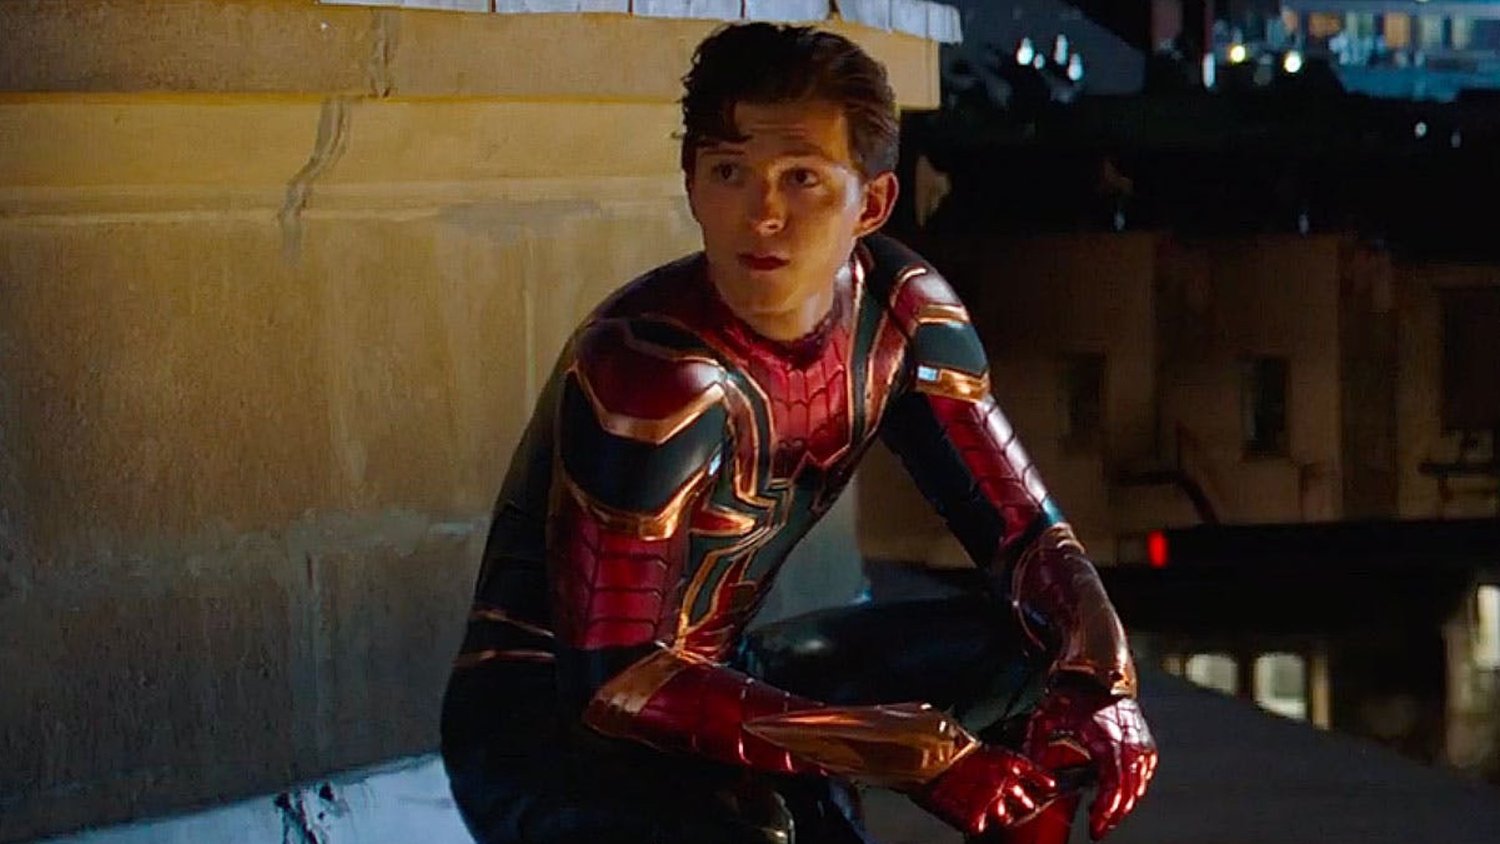 Tom Holland Says ‘Spider-Man 3’ is Going to be “Insane”